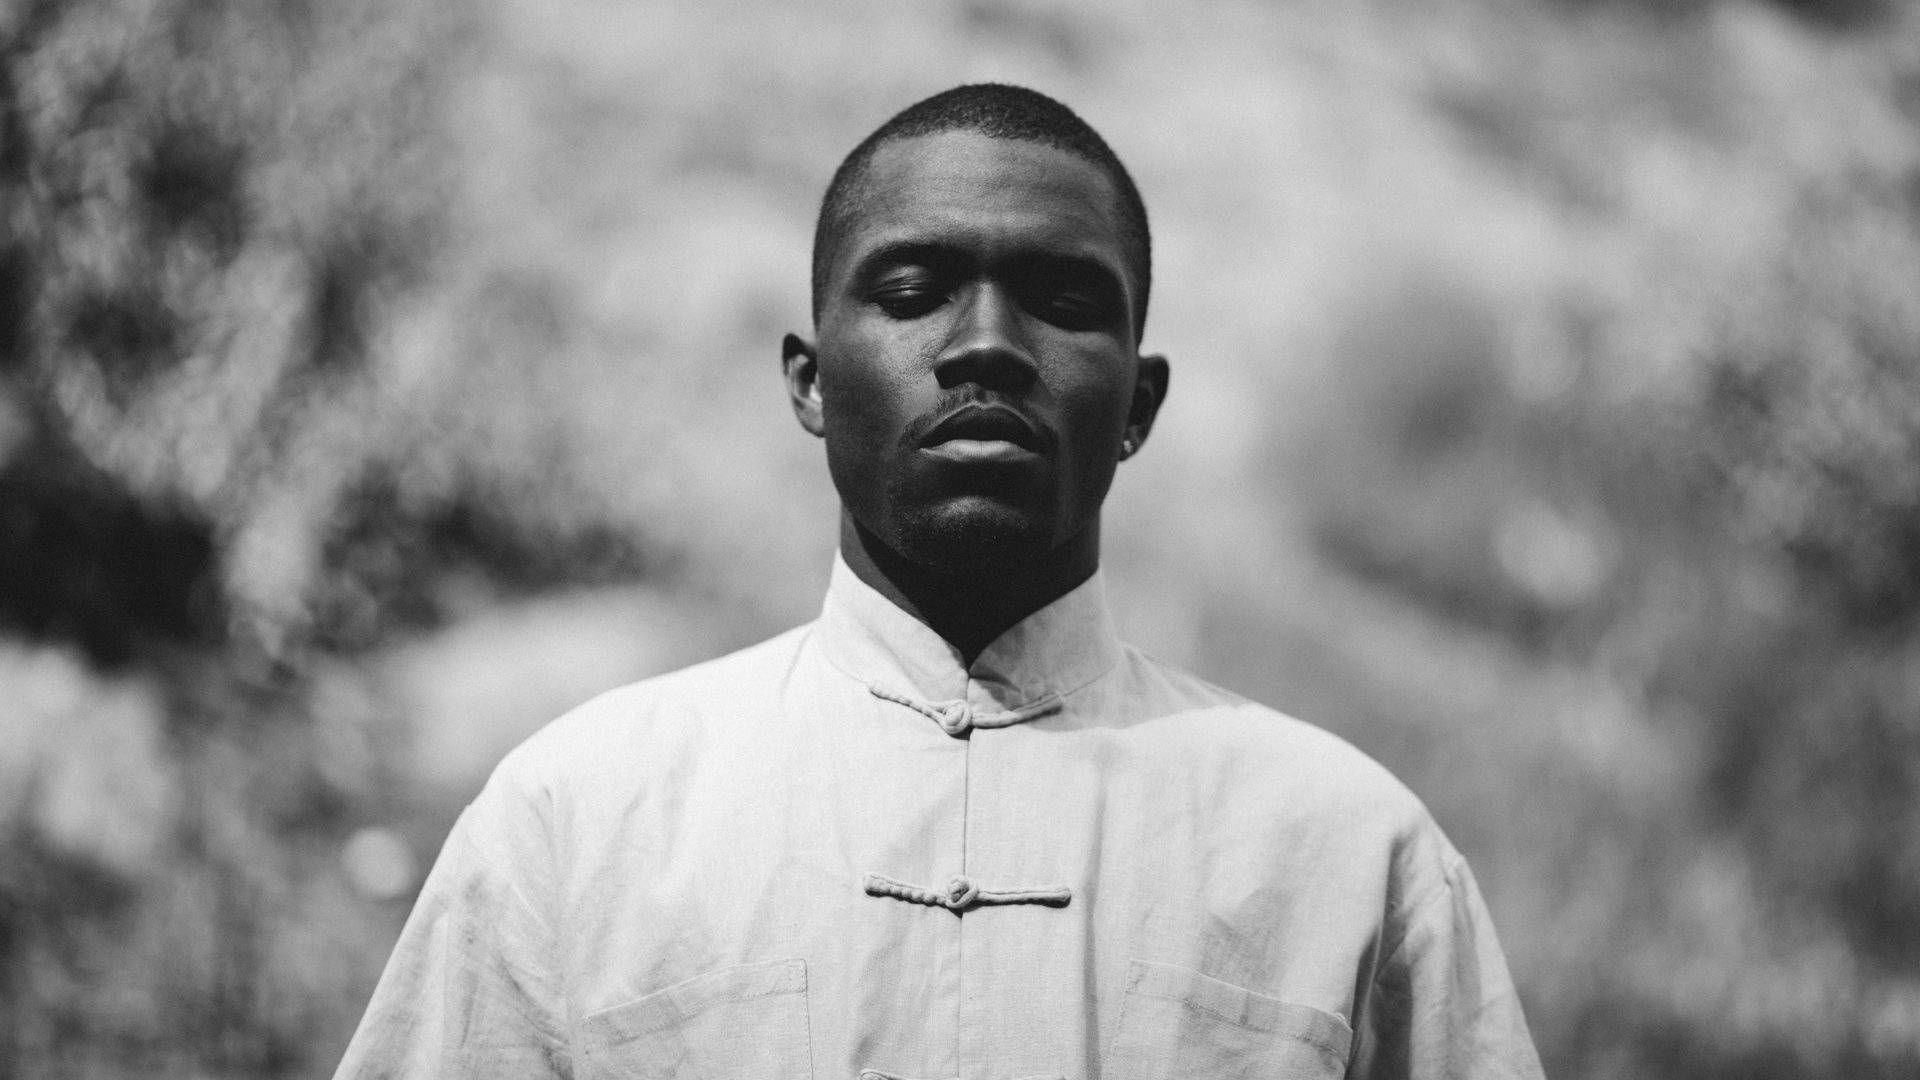 Frank Ocean 1920X1080 Wallpaper and Background Image